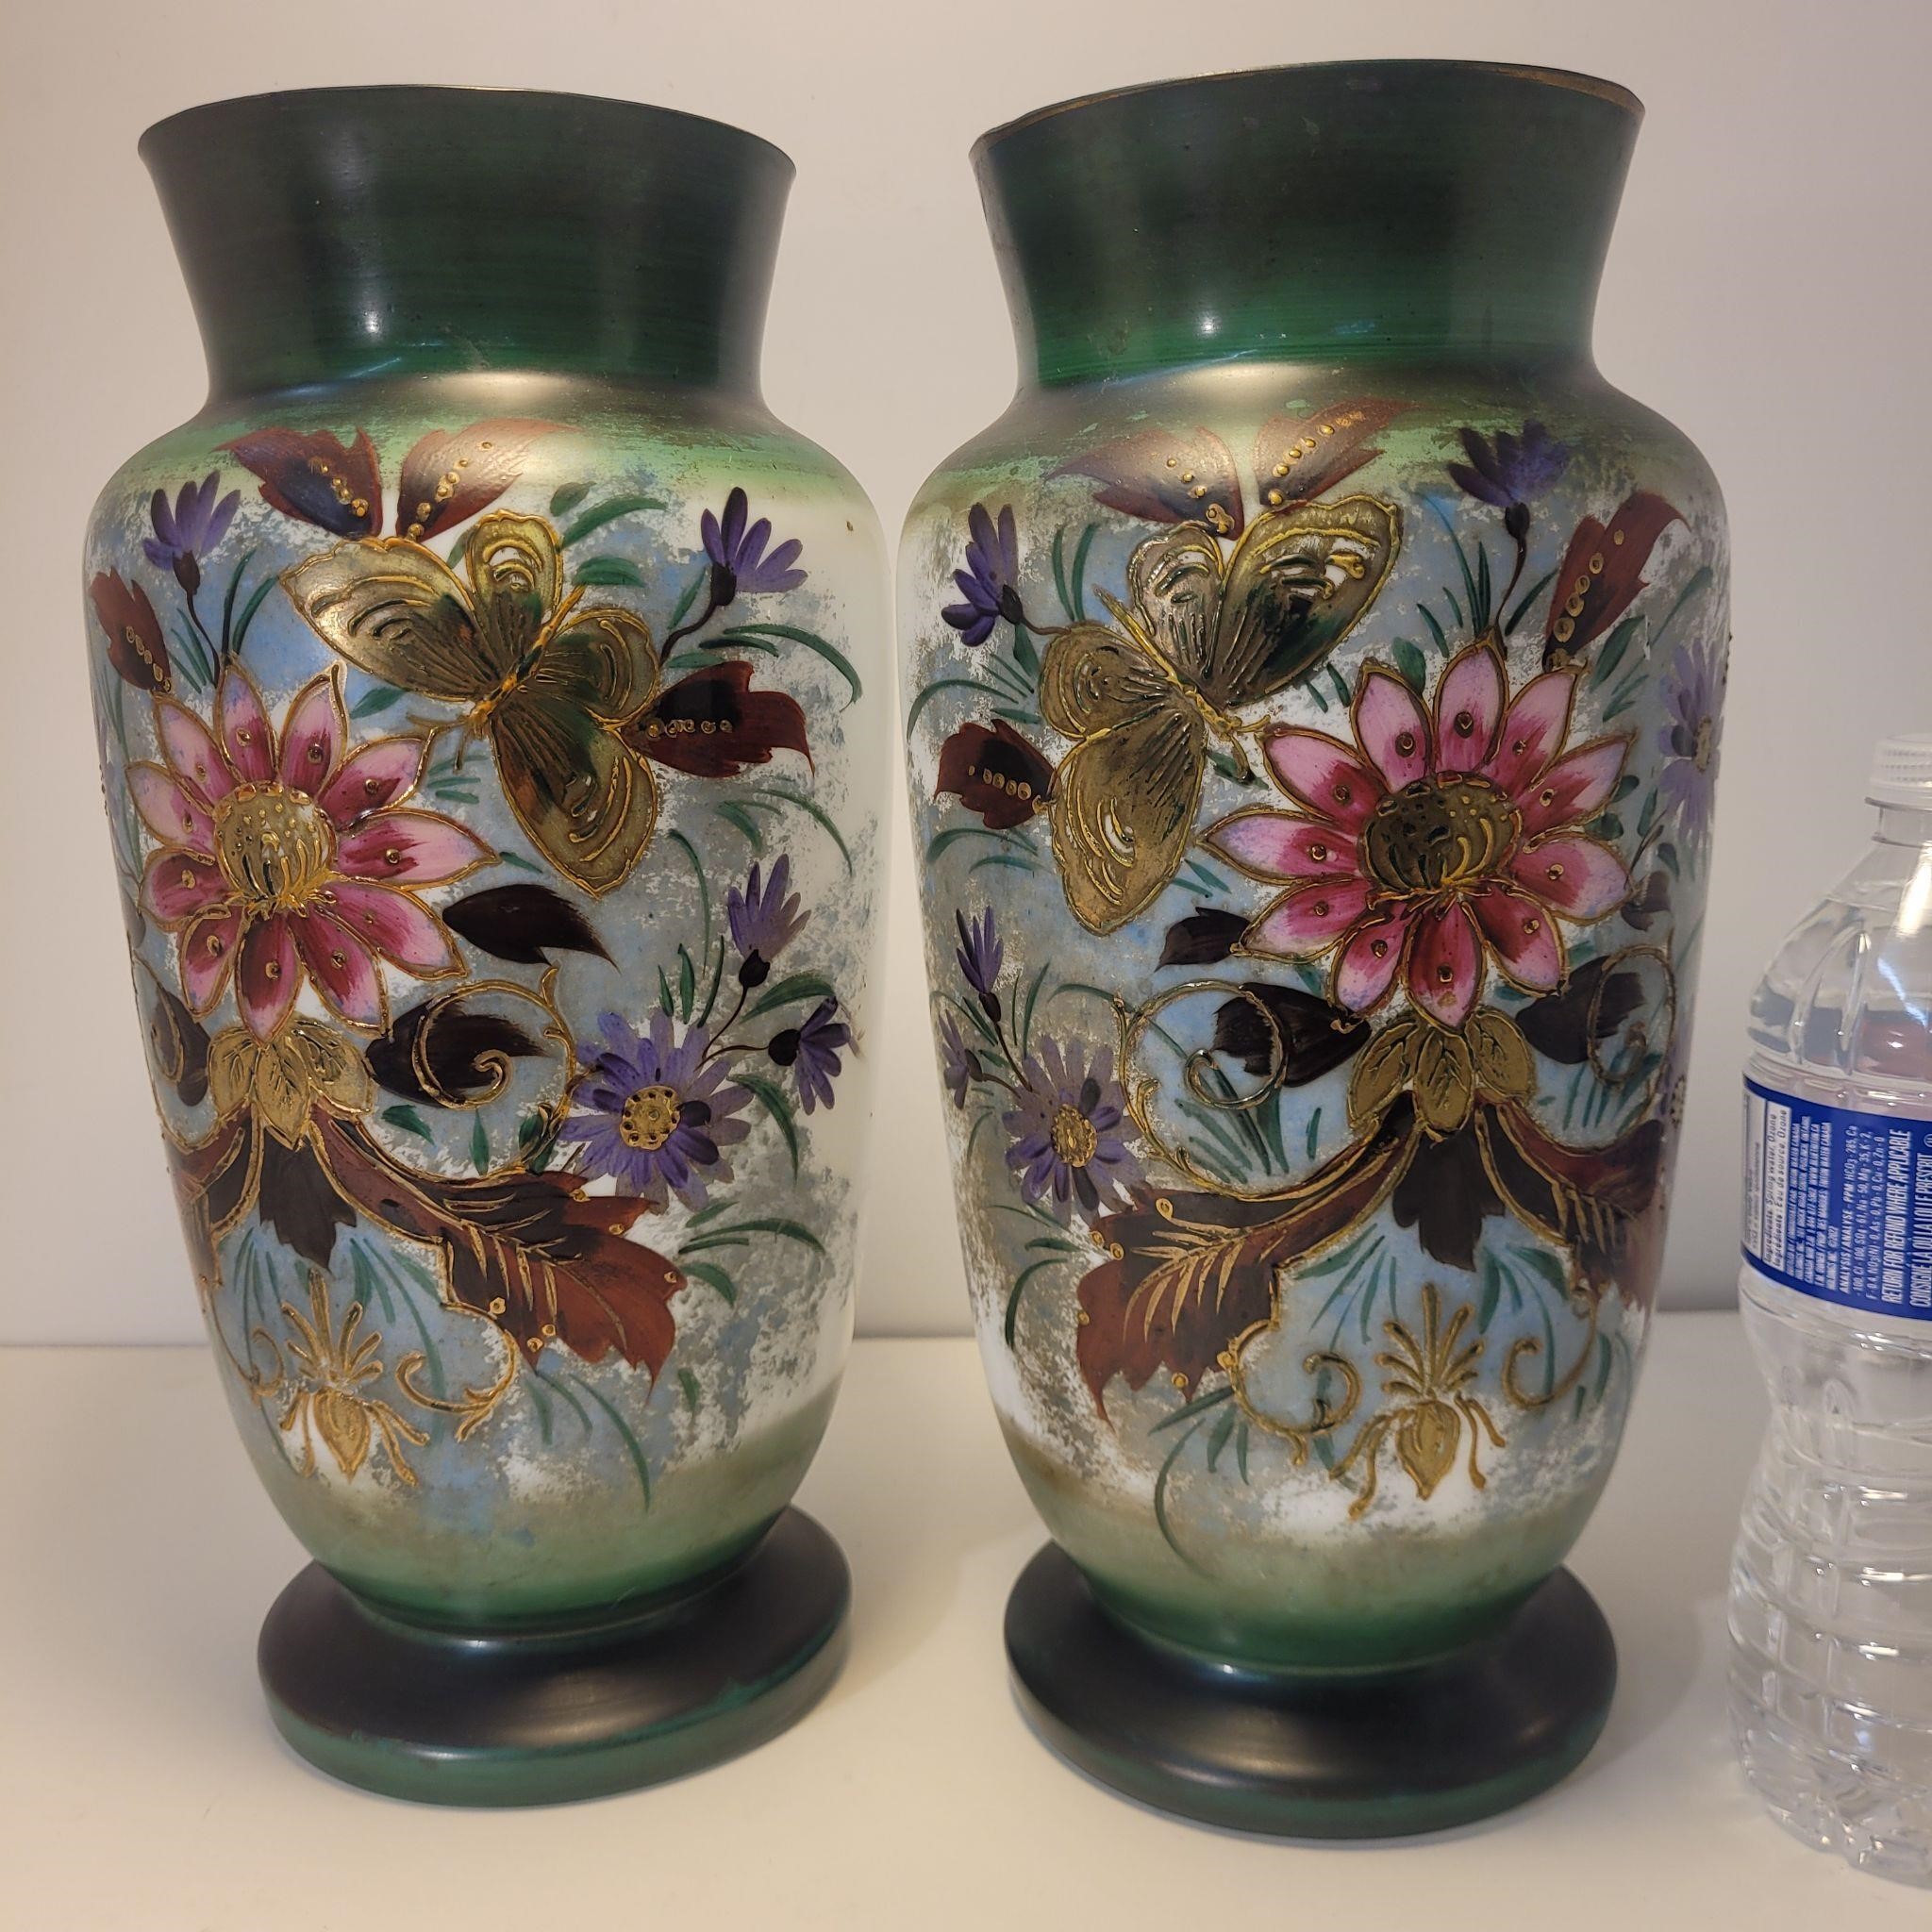 Pair of floral vases with butterflies